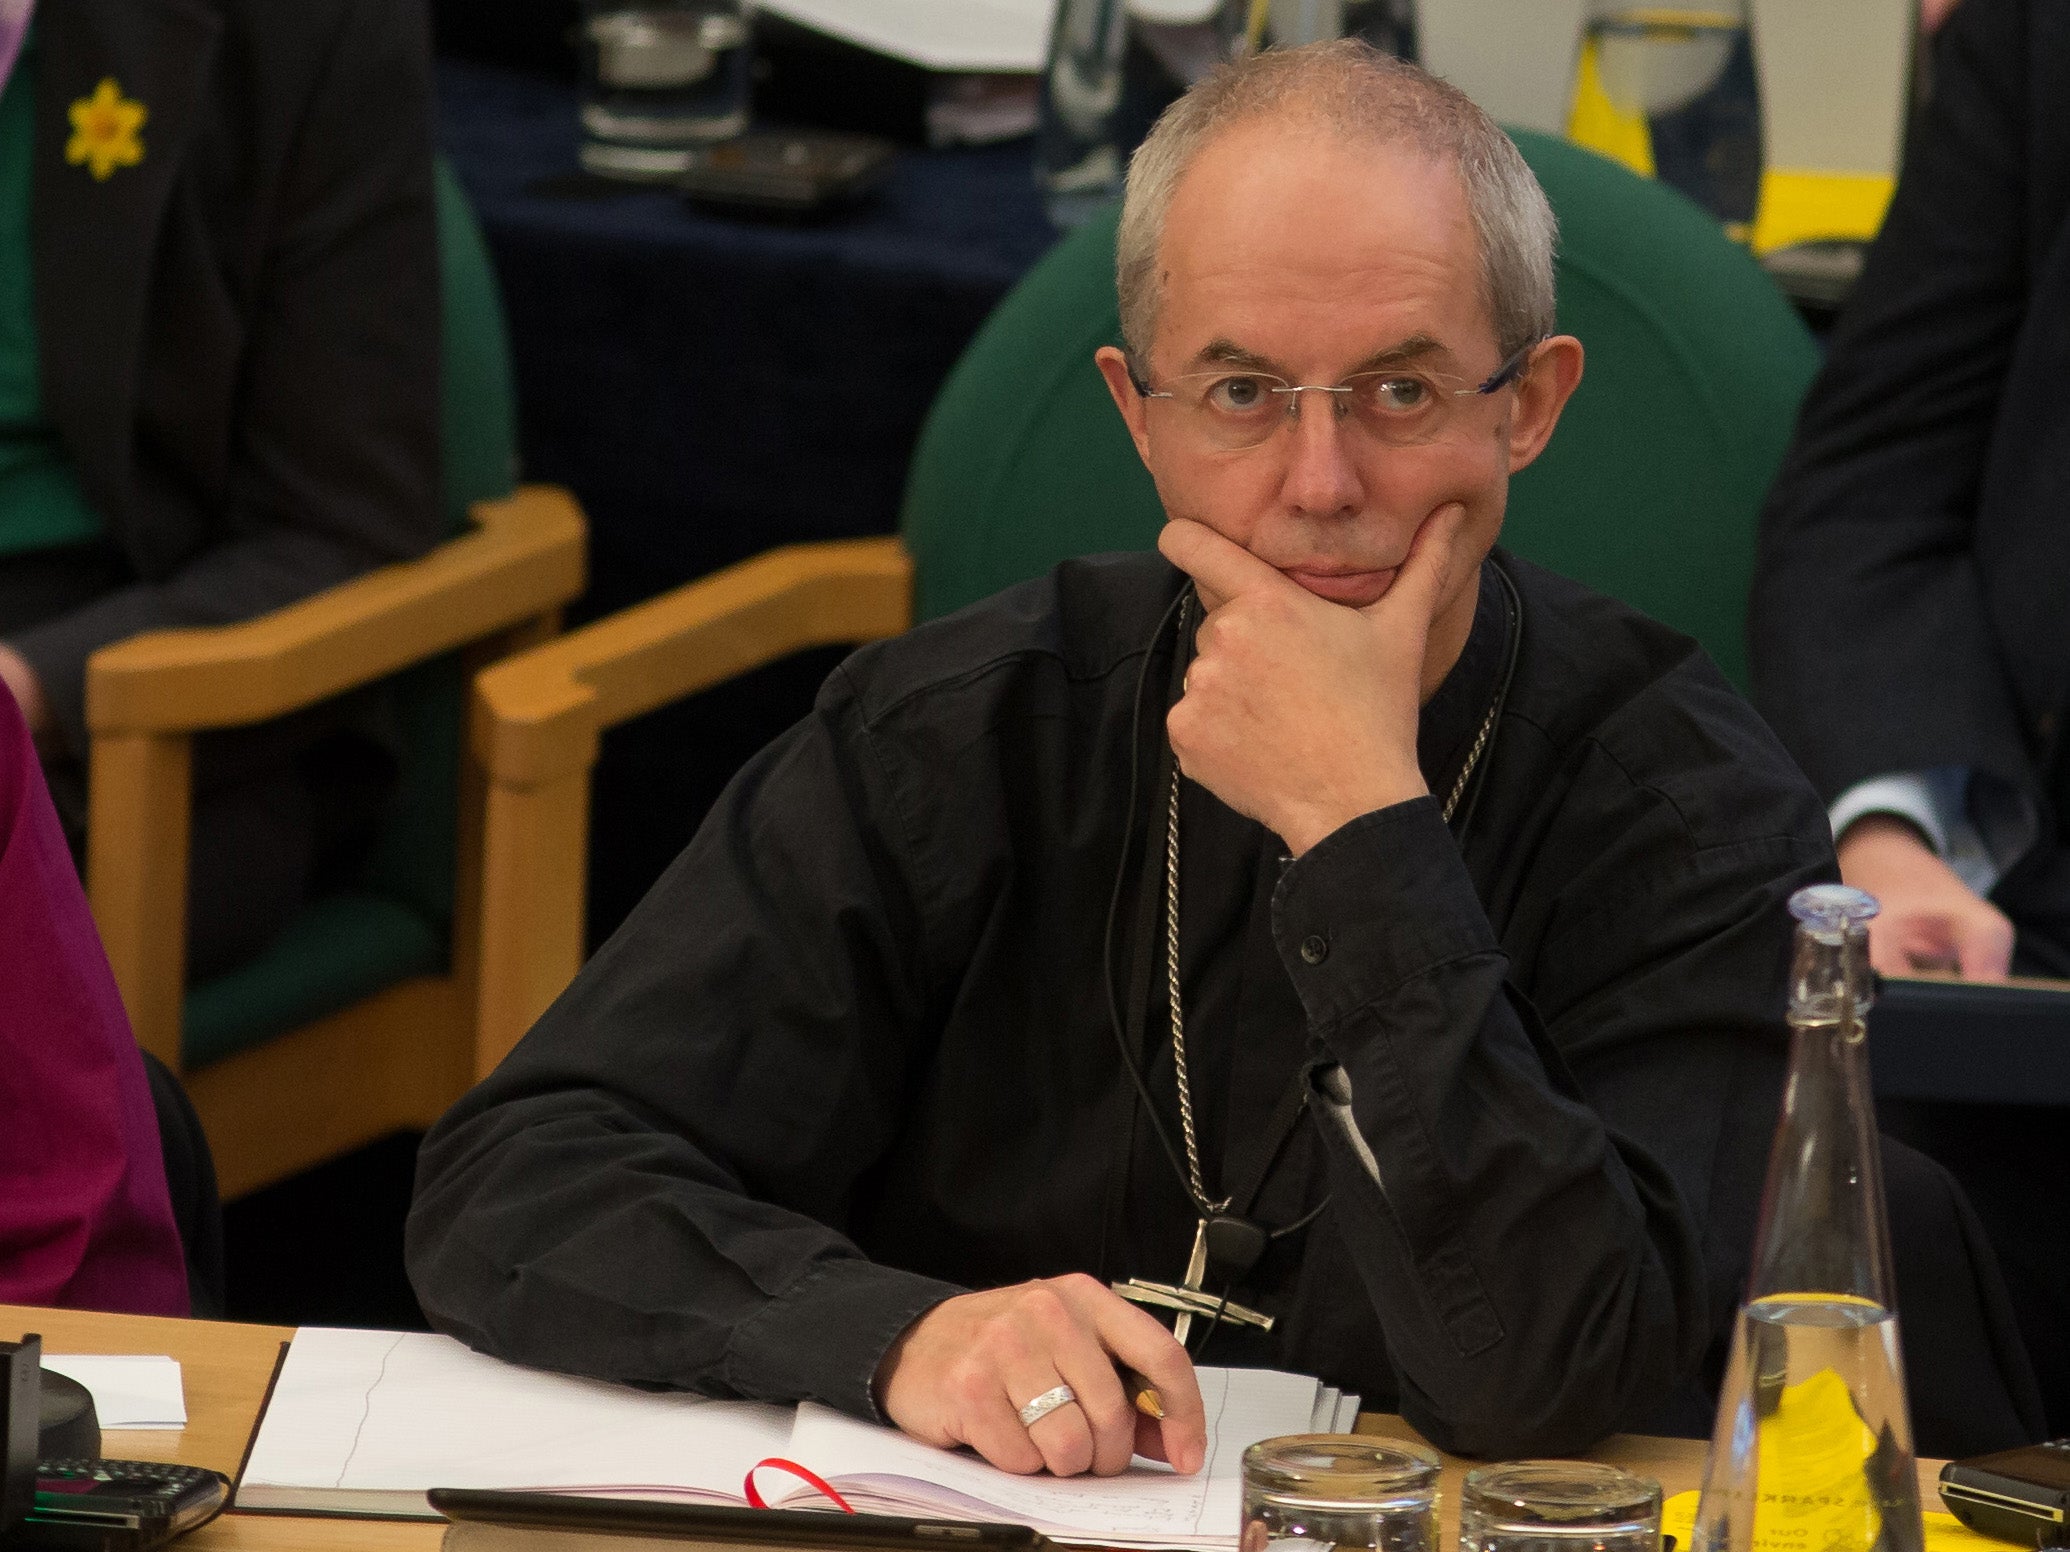 The Archbishop of Canterbury, Justin Welby, is said to have played a part in preventing inspections of out-of-school groups